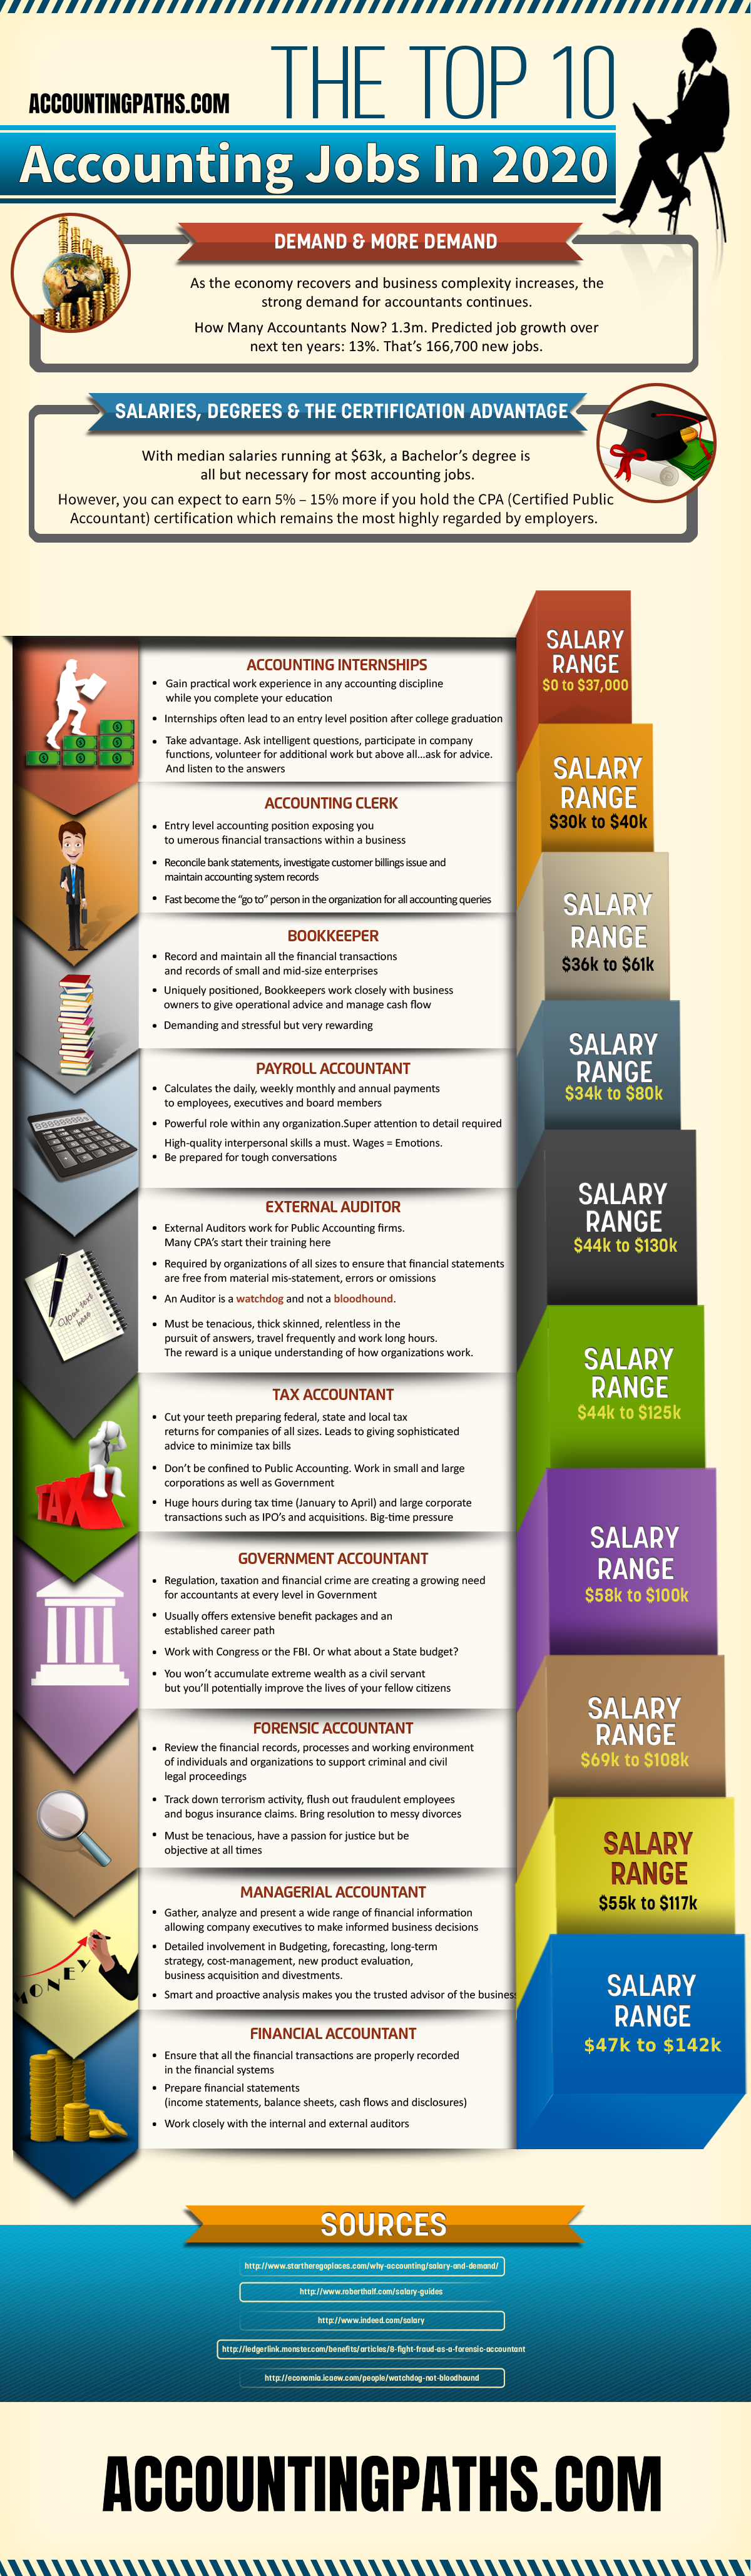 Top 10 Accounting Jobs Infographic